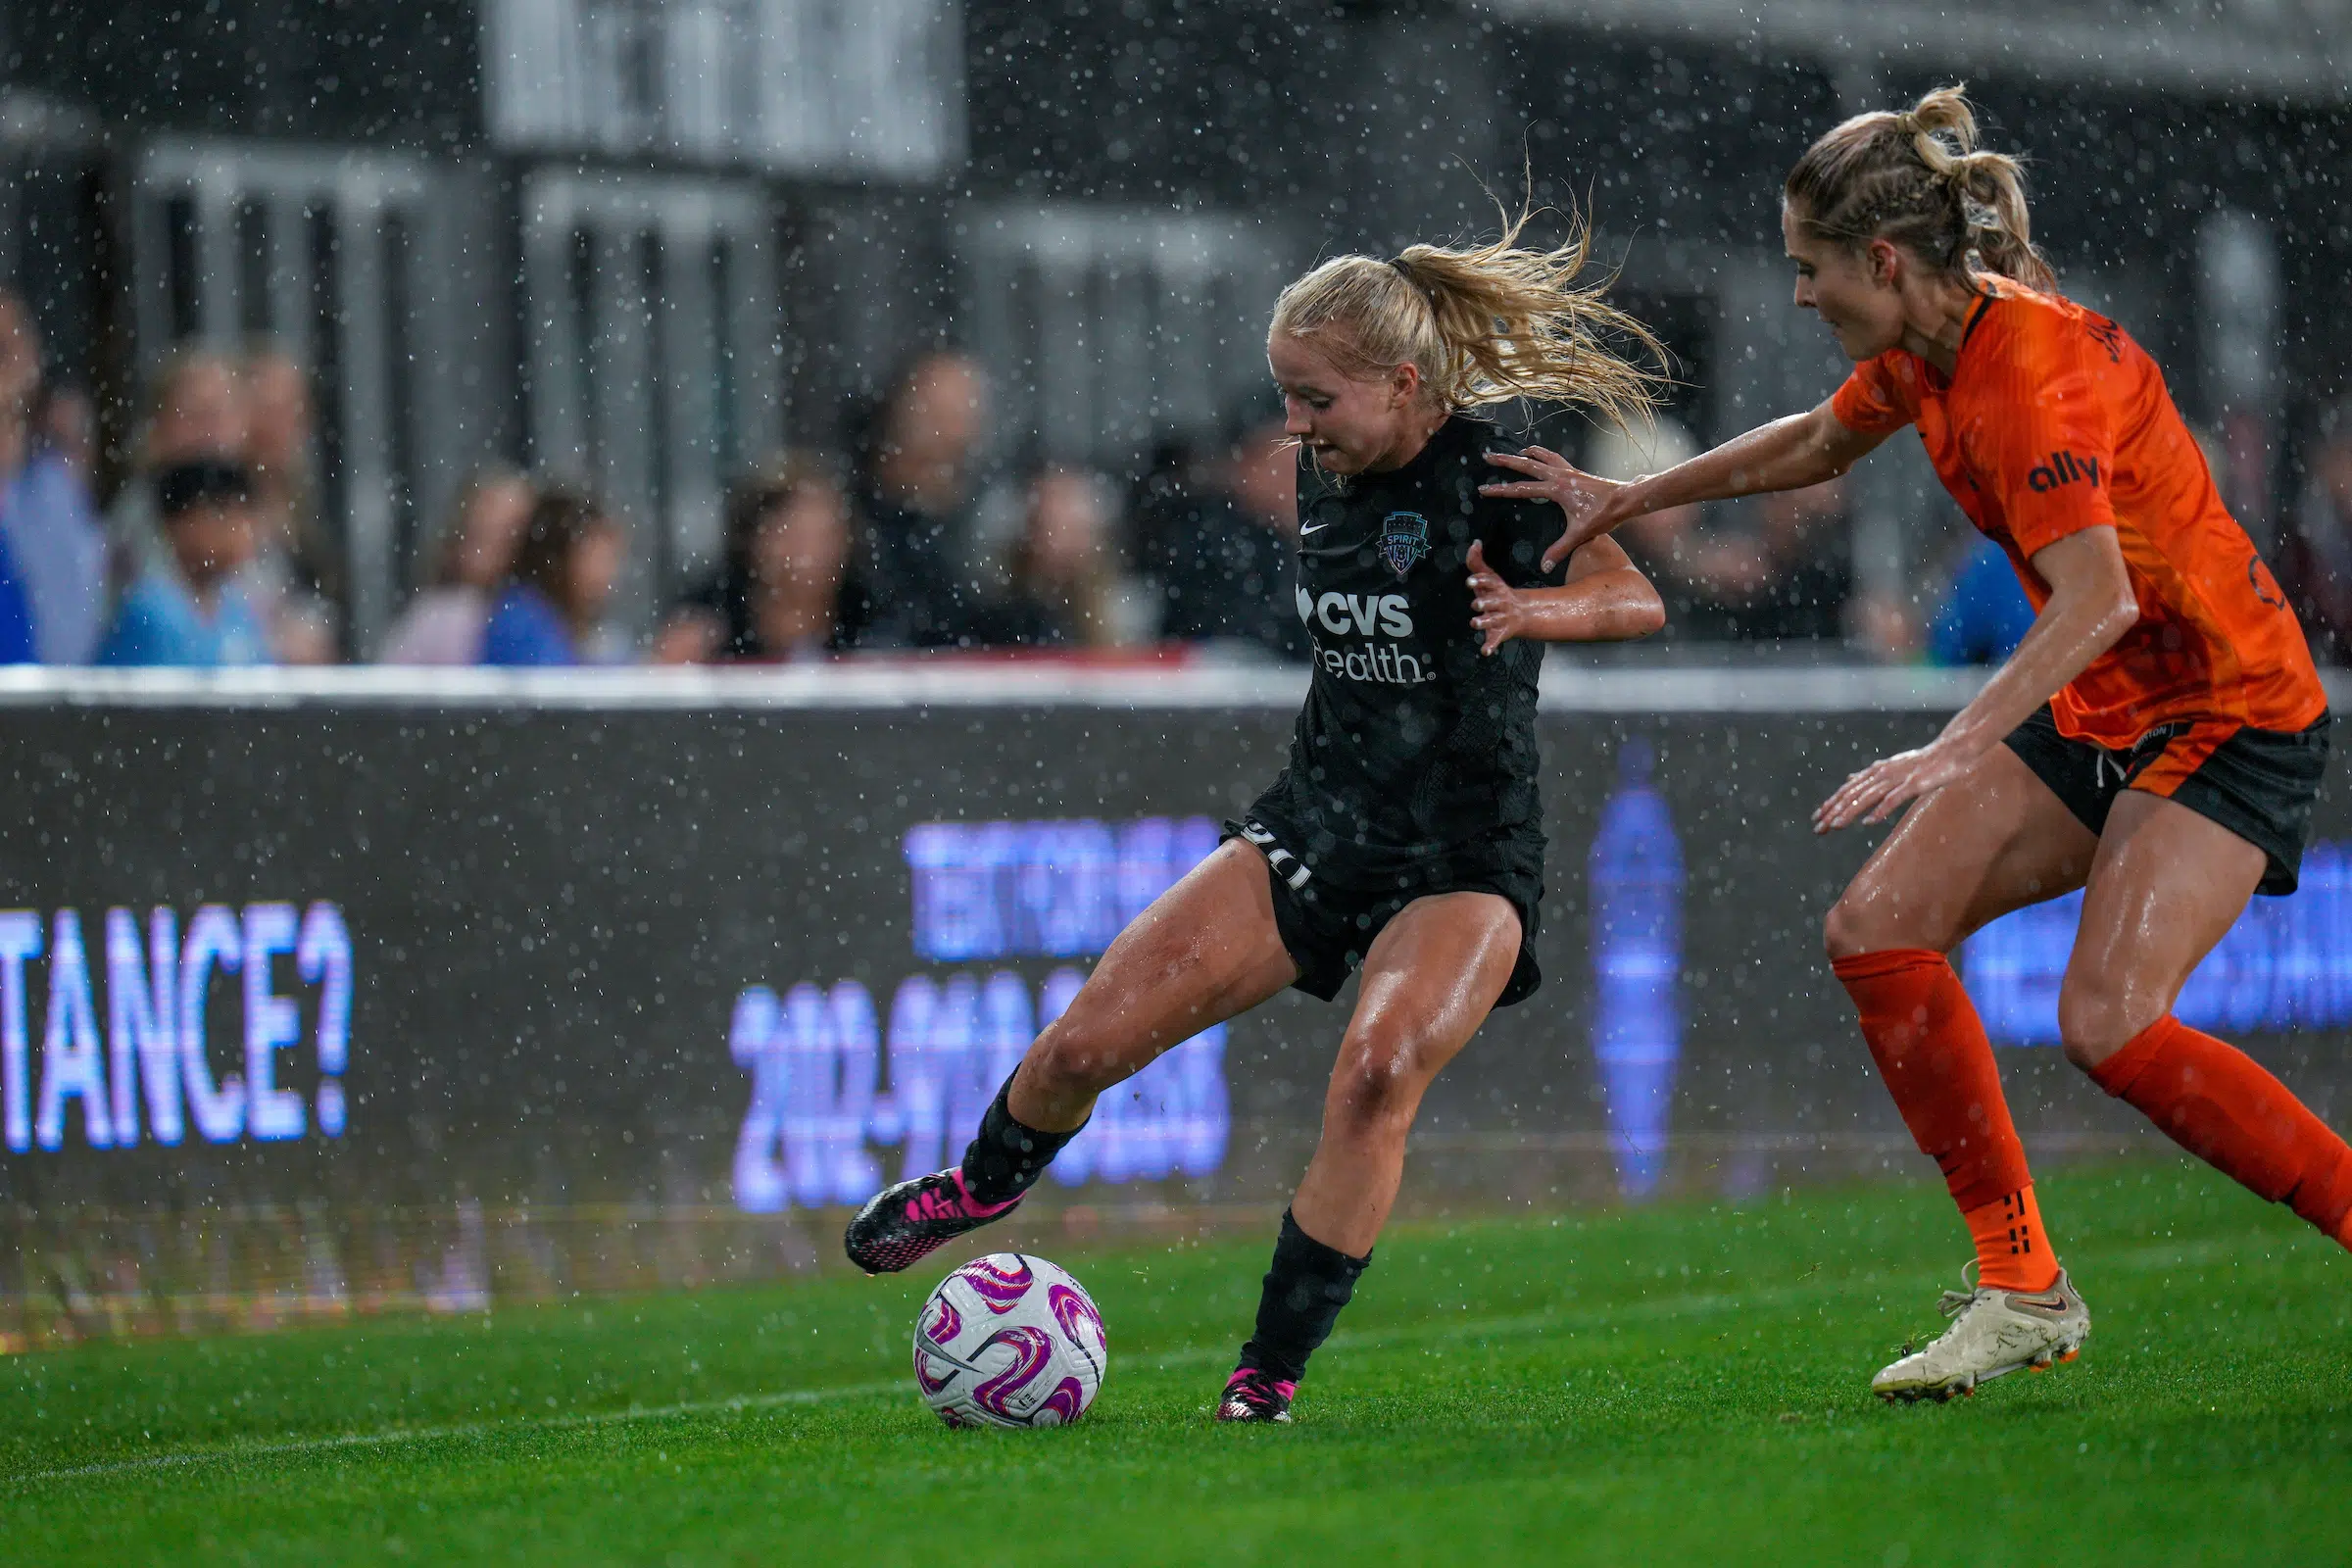 Chloe Ricketts in a black uniform works to keep a soccer ball away from a defender in an orange uniform as rain pours down.